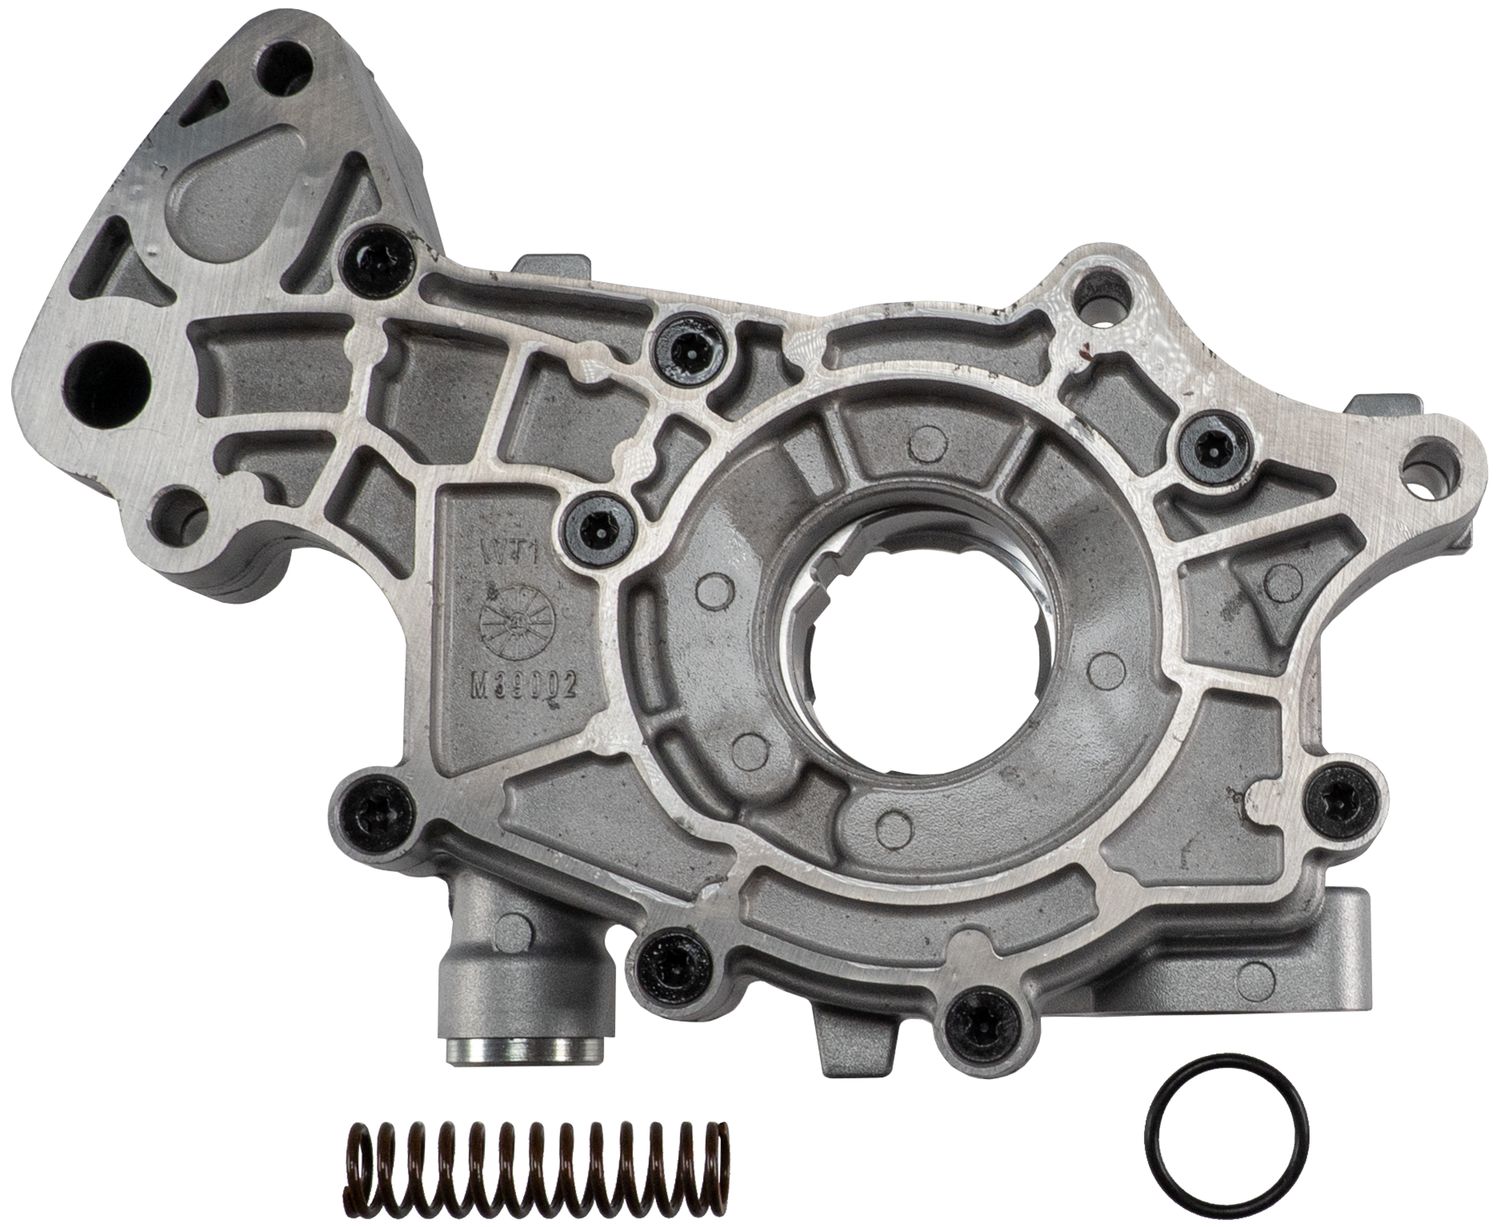 Melling M390HV Hi Volume Oil Pump 3.5 3.7 fits Various F150 Edge Explorer Expedition Fusion and others Fits select: 2011-2019 FORD EXPLORER, 2011-2017 FORD F150 - image 4 of 4